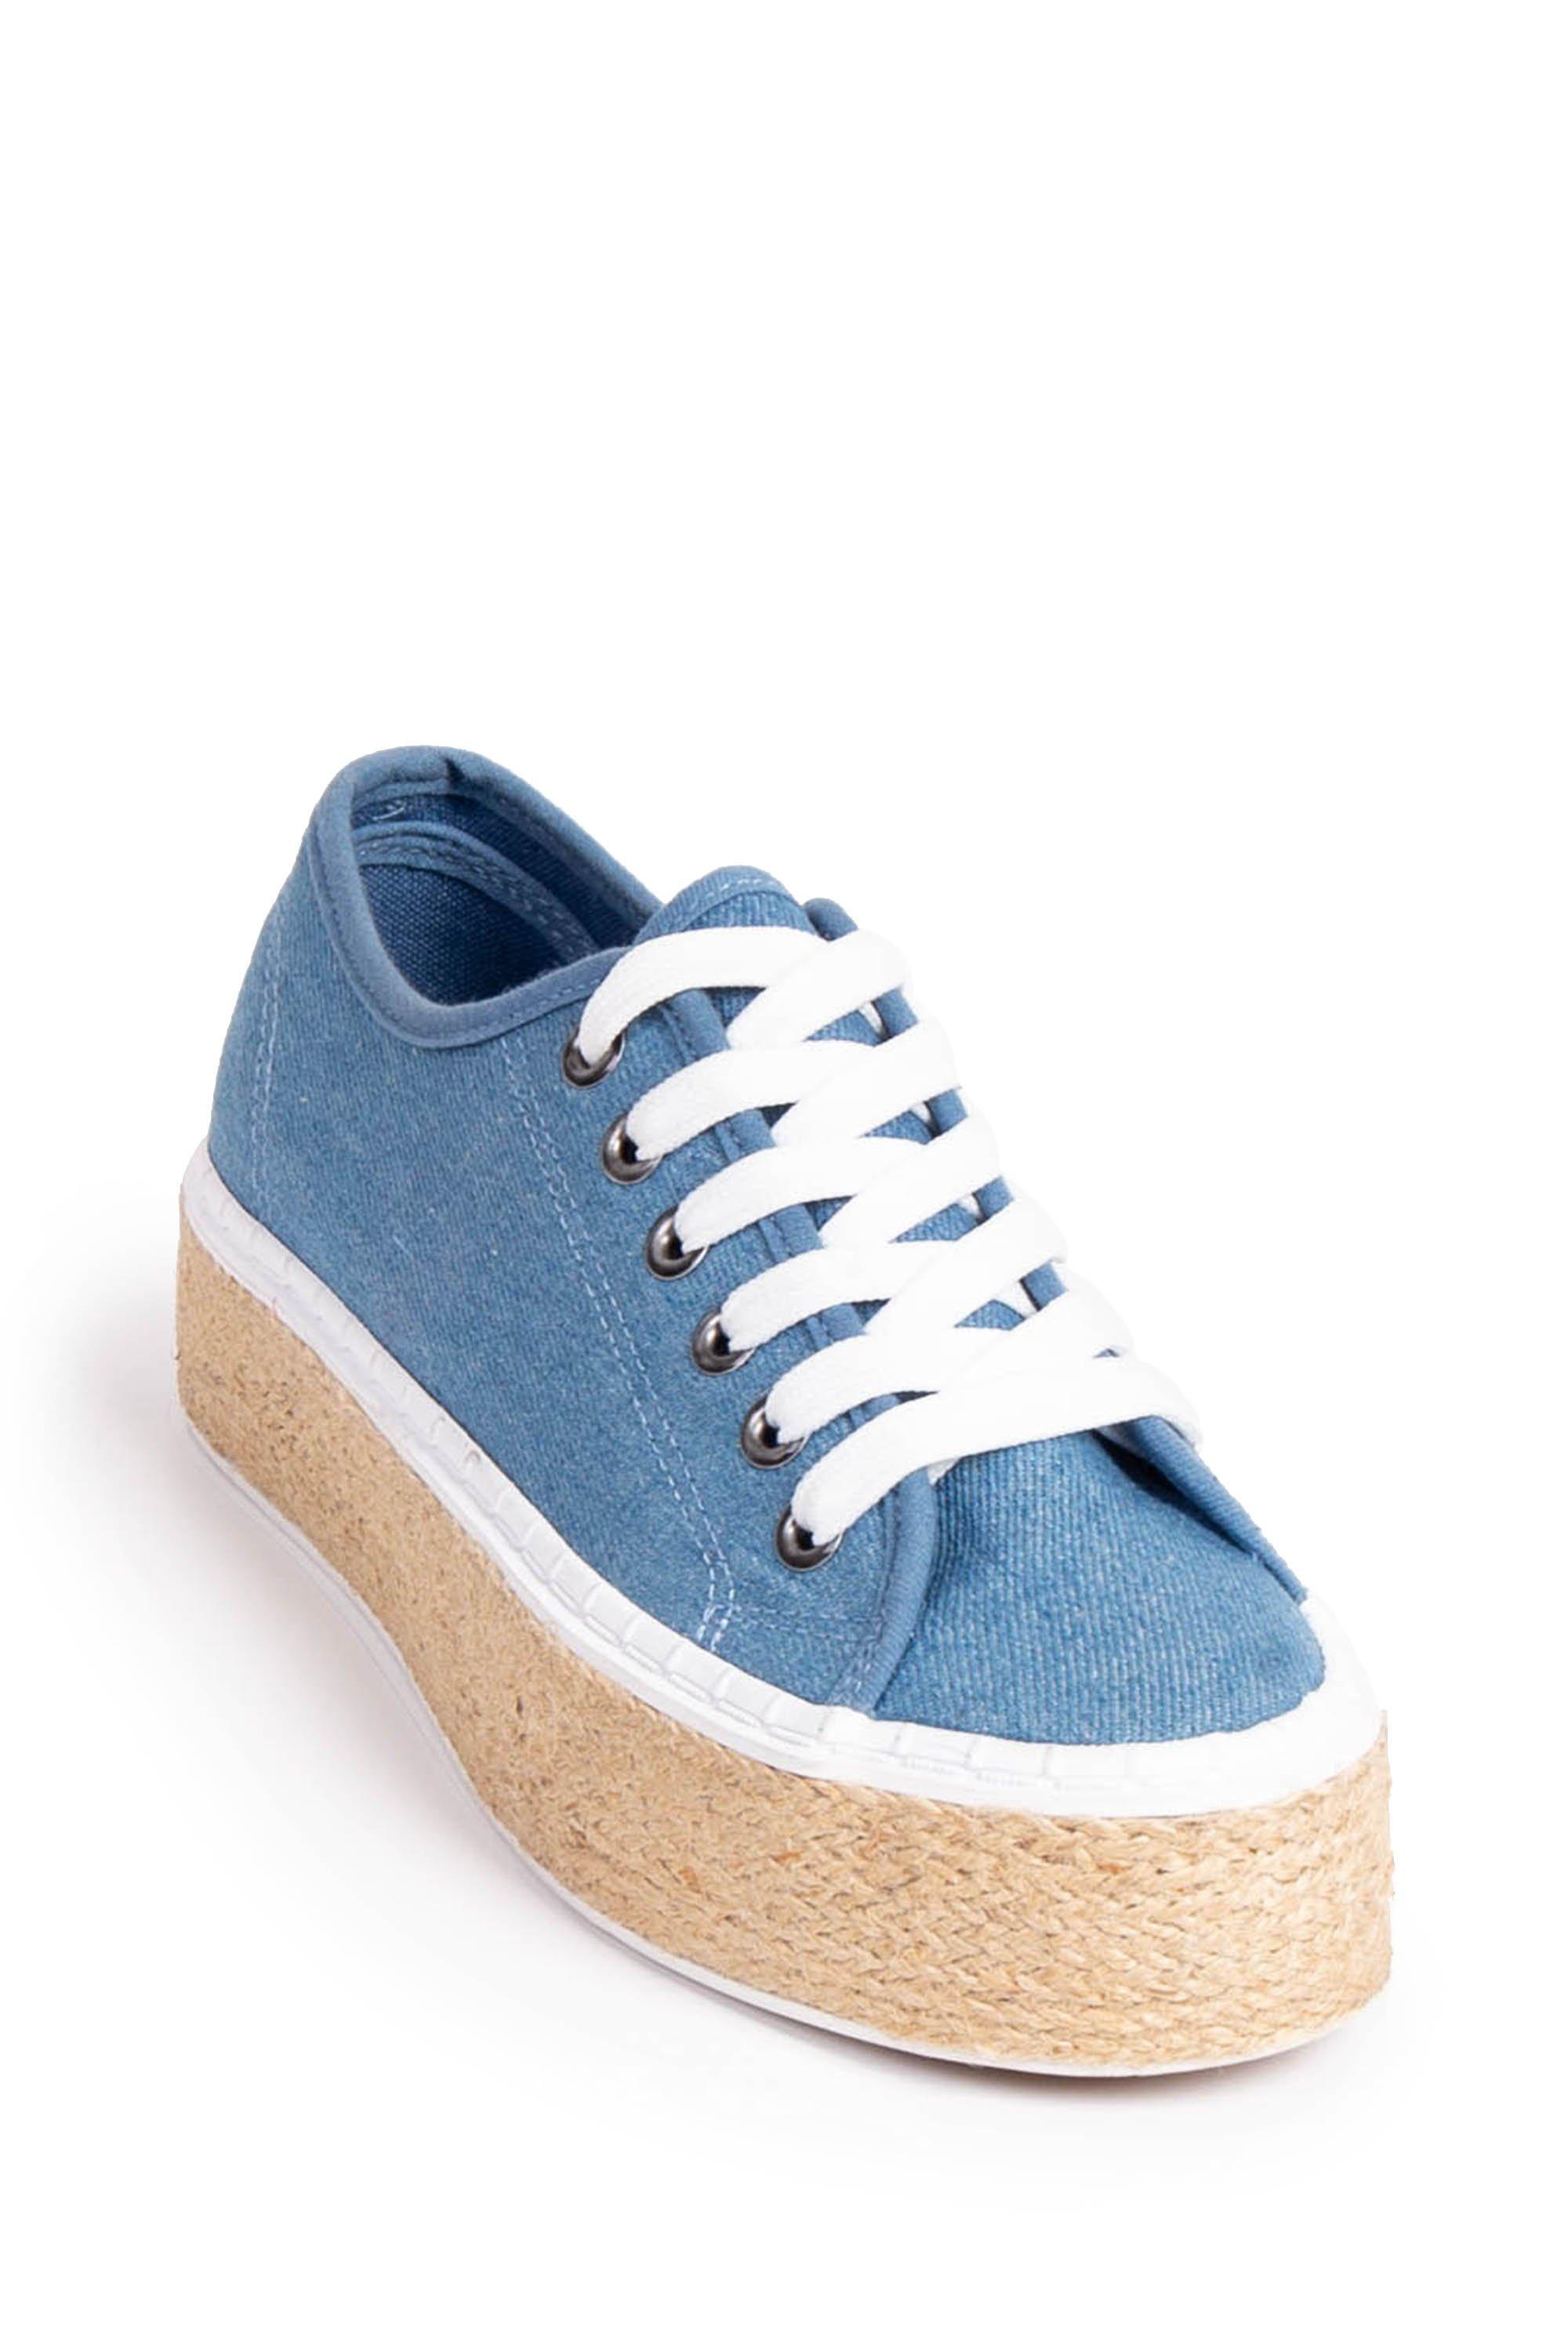 LACE UP DENIM SNEAKERS